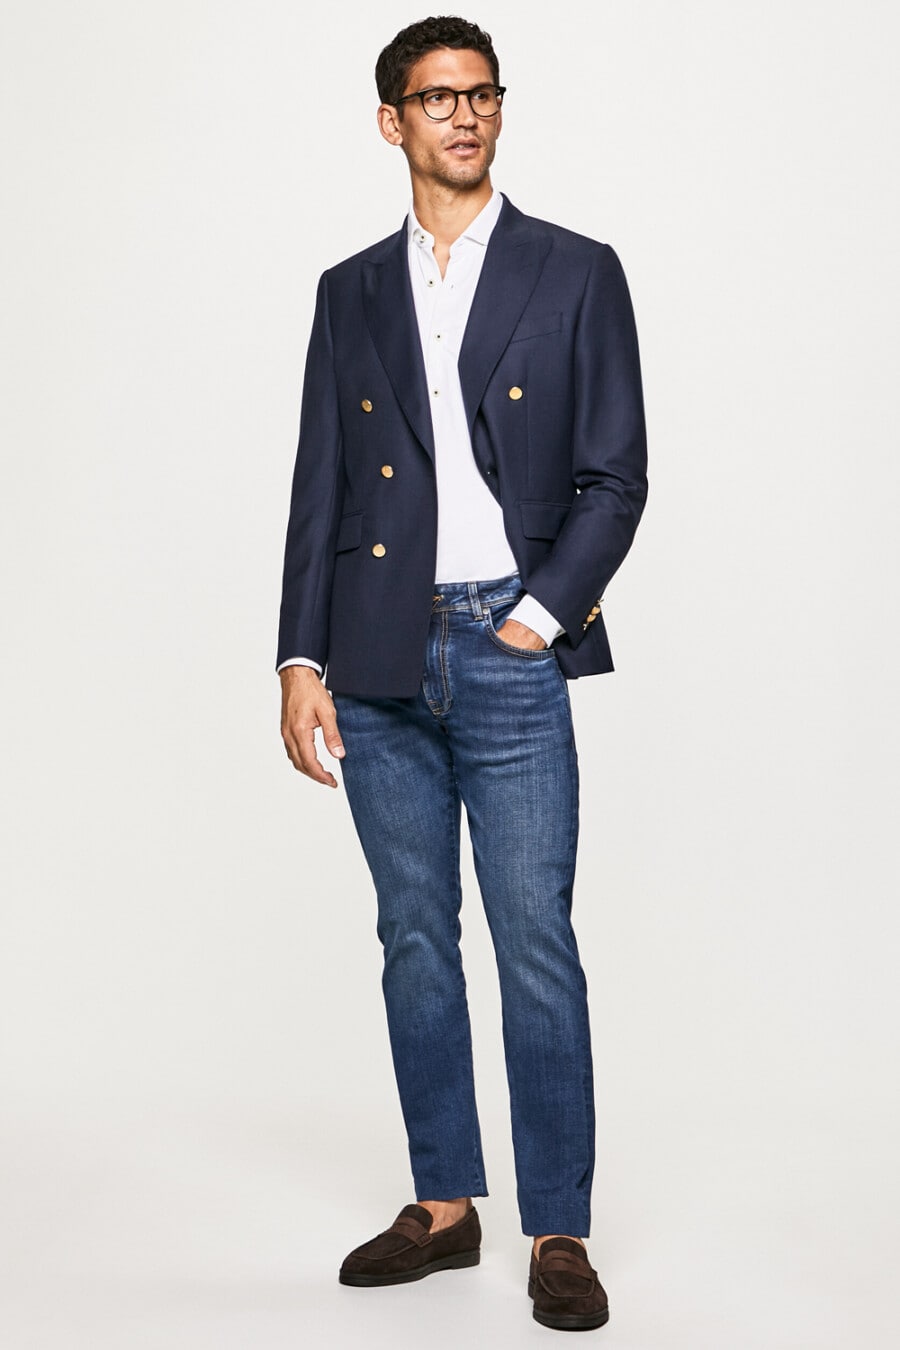 Navy double-breasted blazer, mid-wash jeans, white shirt and brown suede penny loafers worn sockless outfit